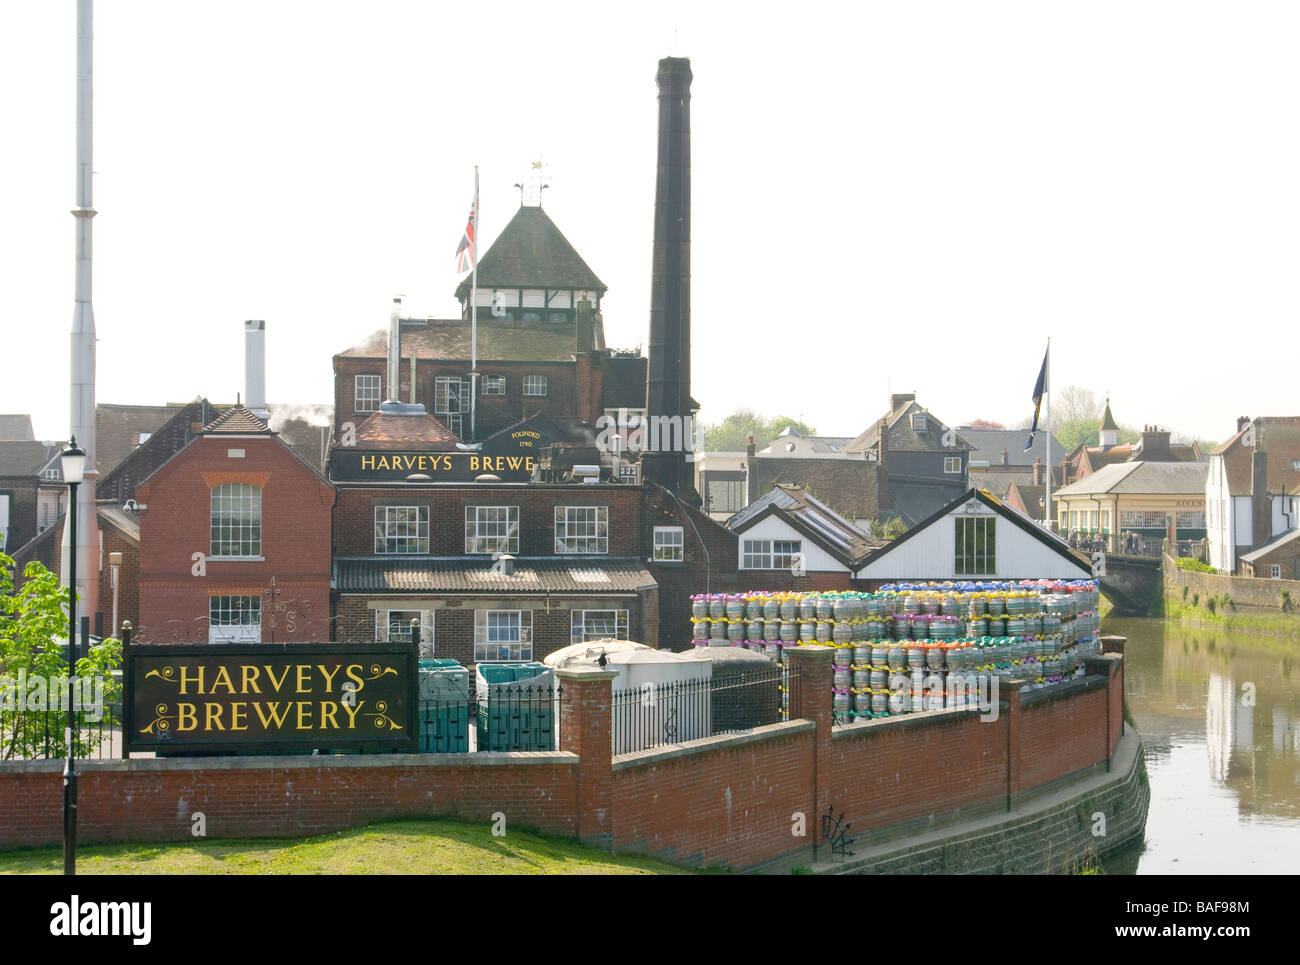 Harveys Brewery On The Banks Of The River Ouse Lewes East Sussex Breweries Stock Photo